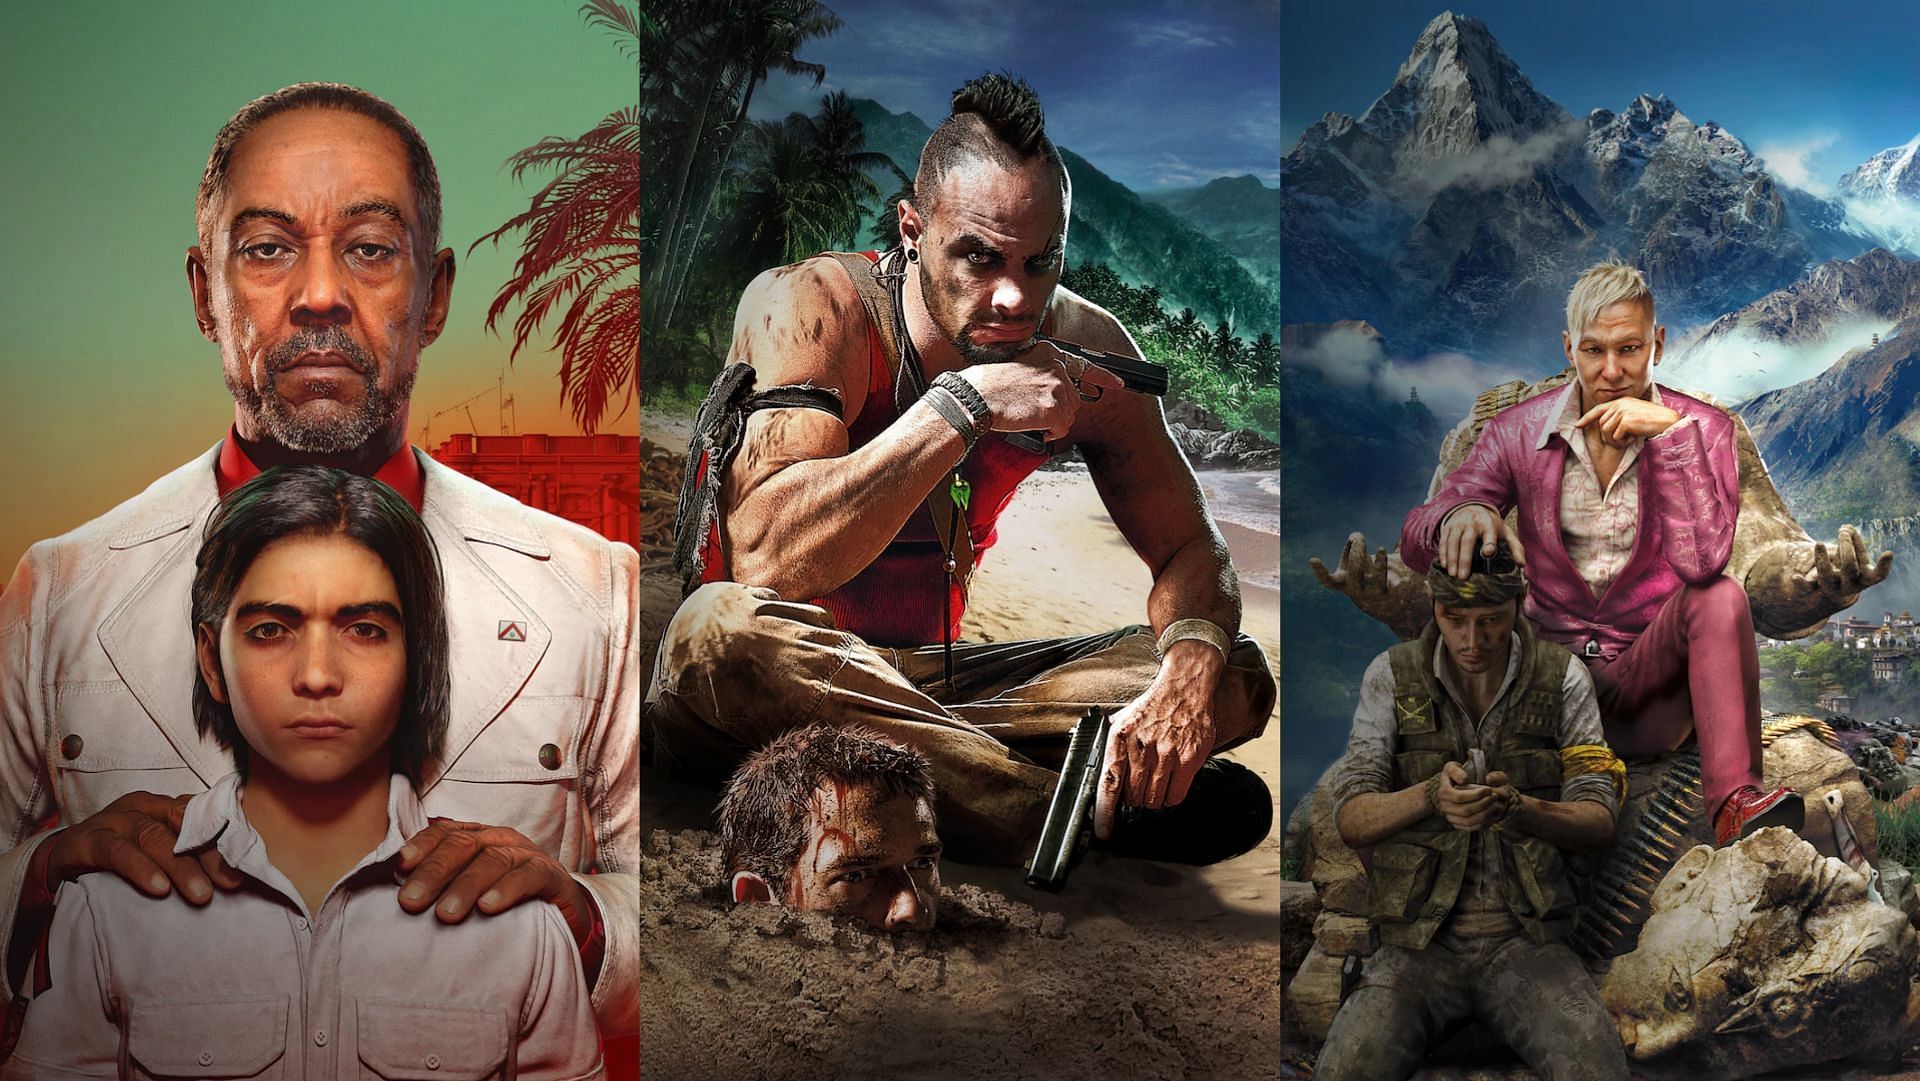 All Far Cry games on PC - browse the whole franchise